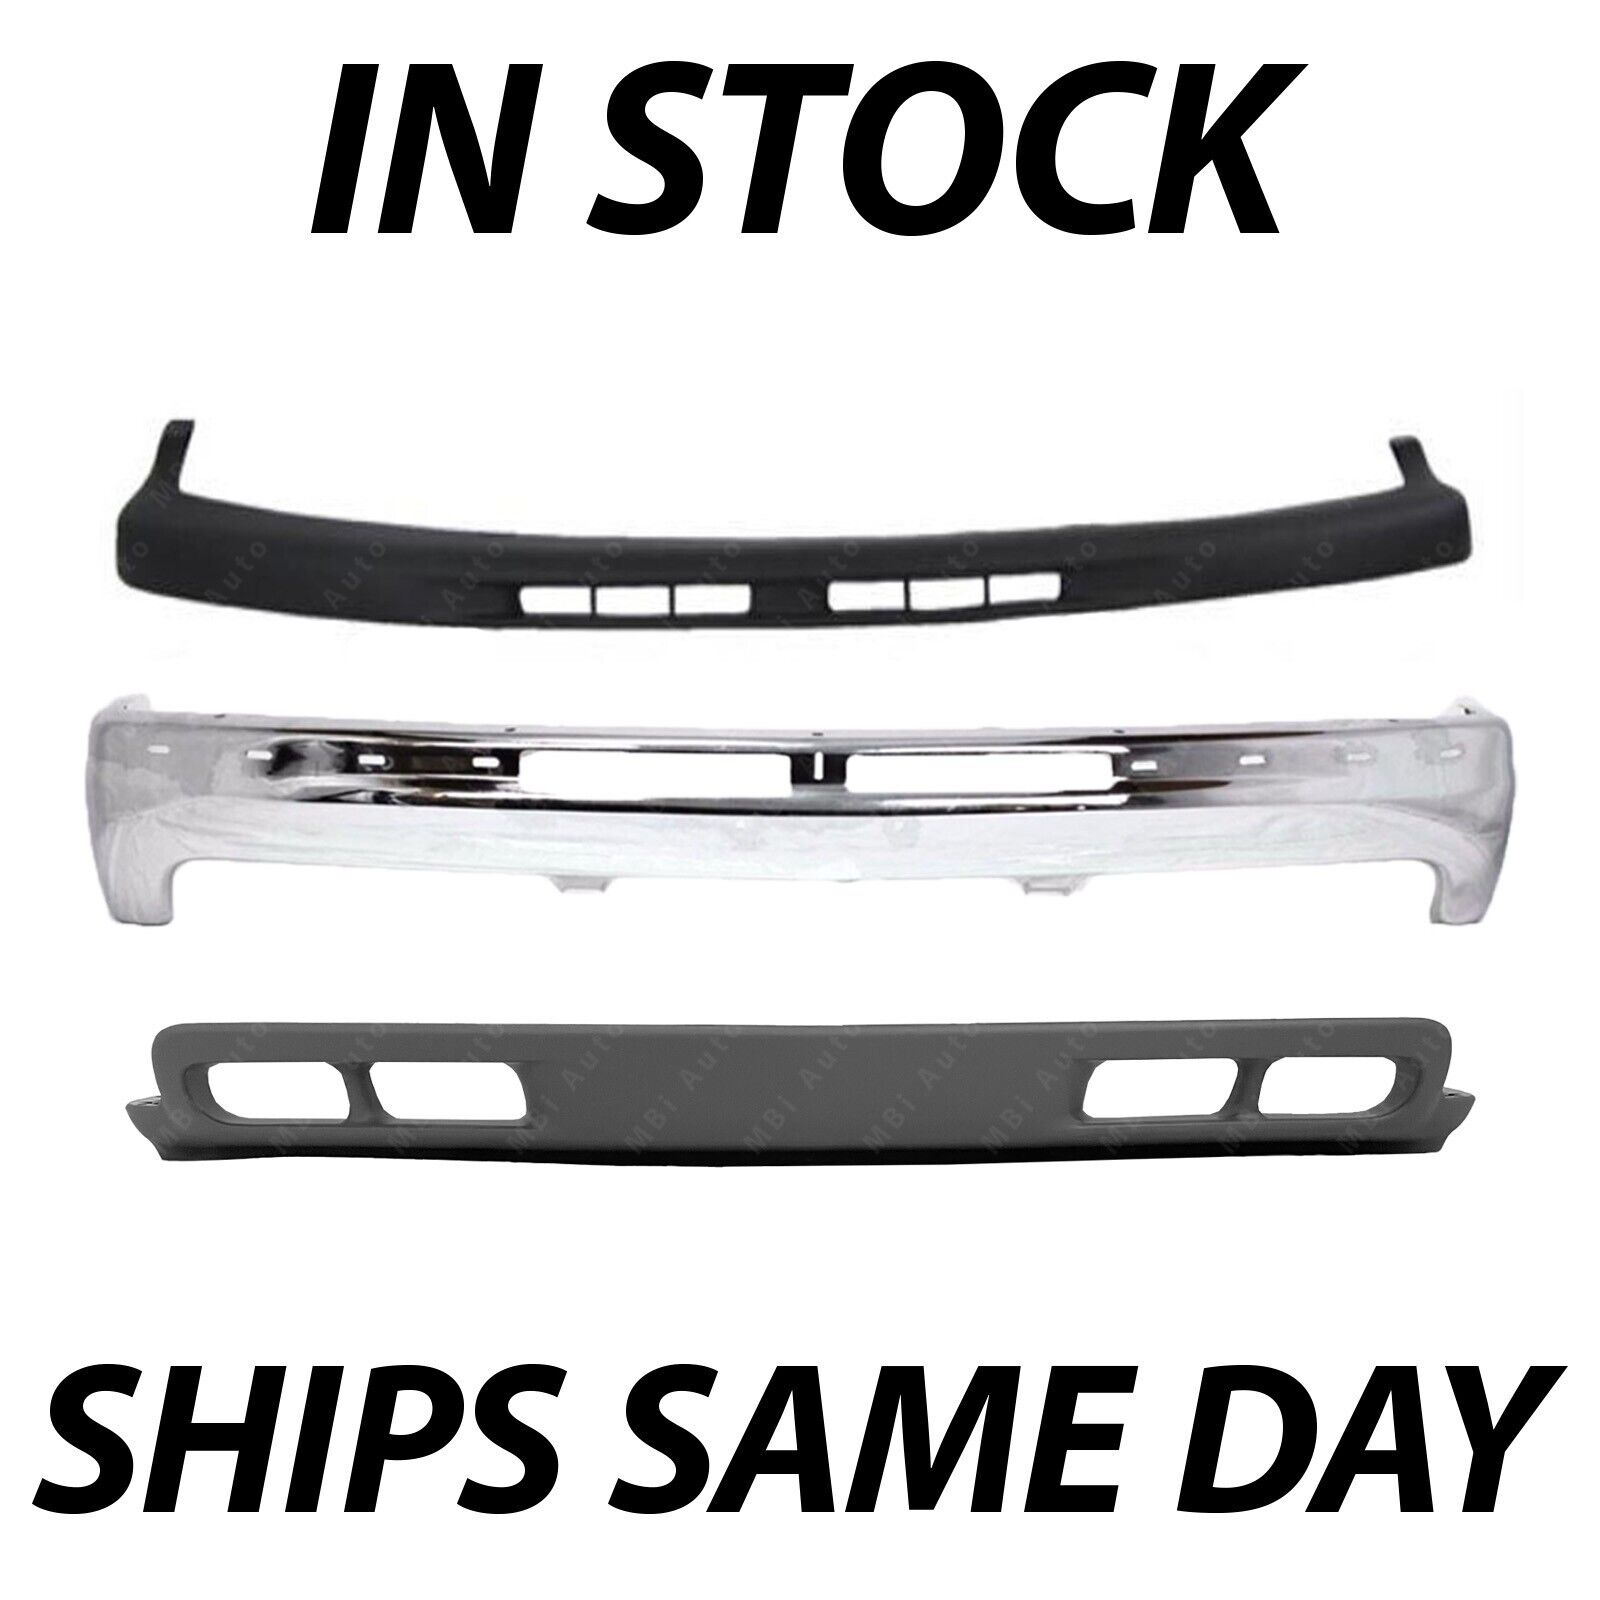 NEW Complete Full Front Bumper Kit For 1999-2002 Chevy Silverado Tahoe Suburban